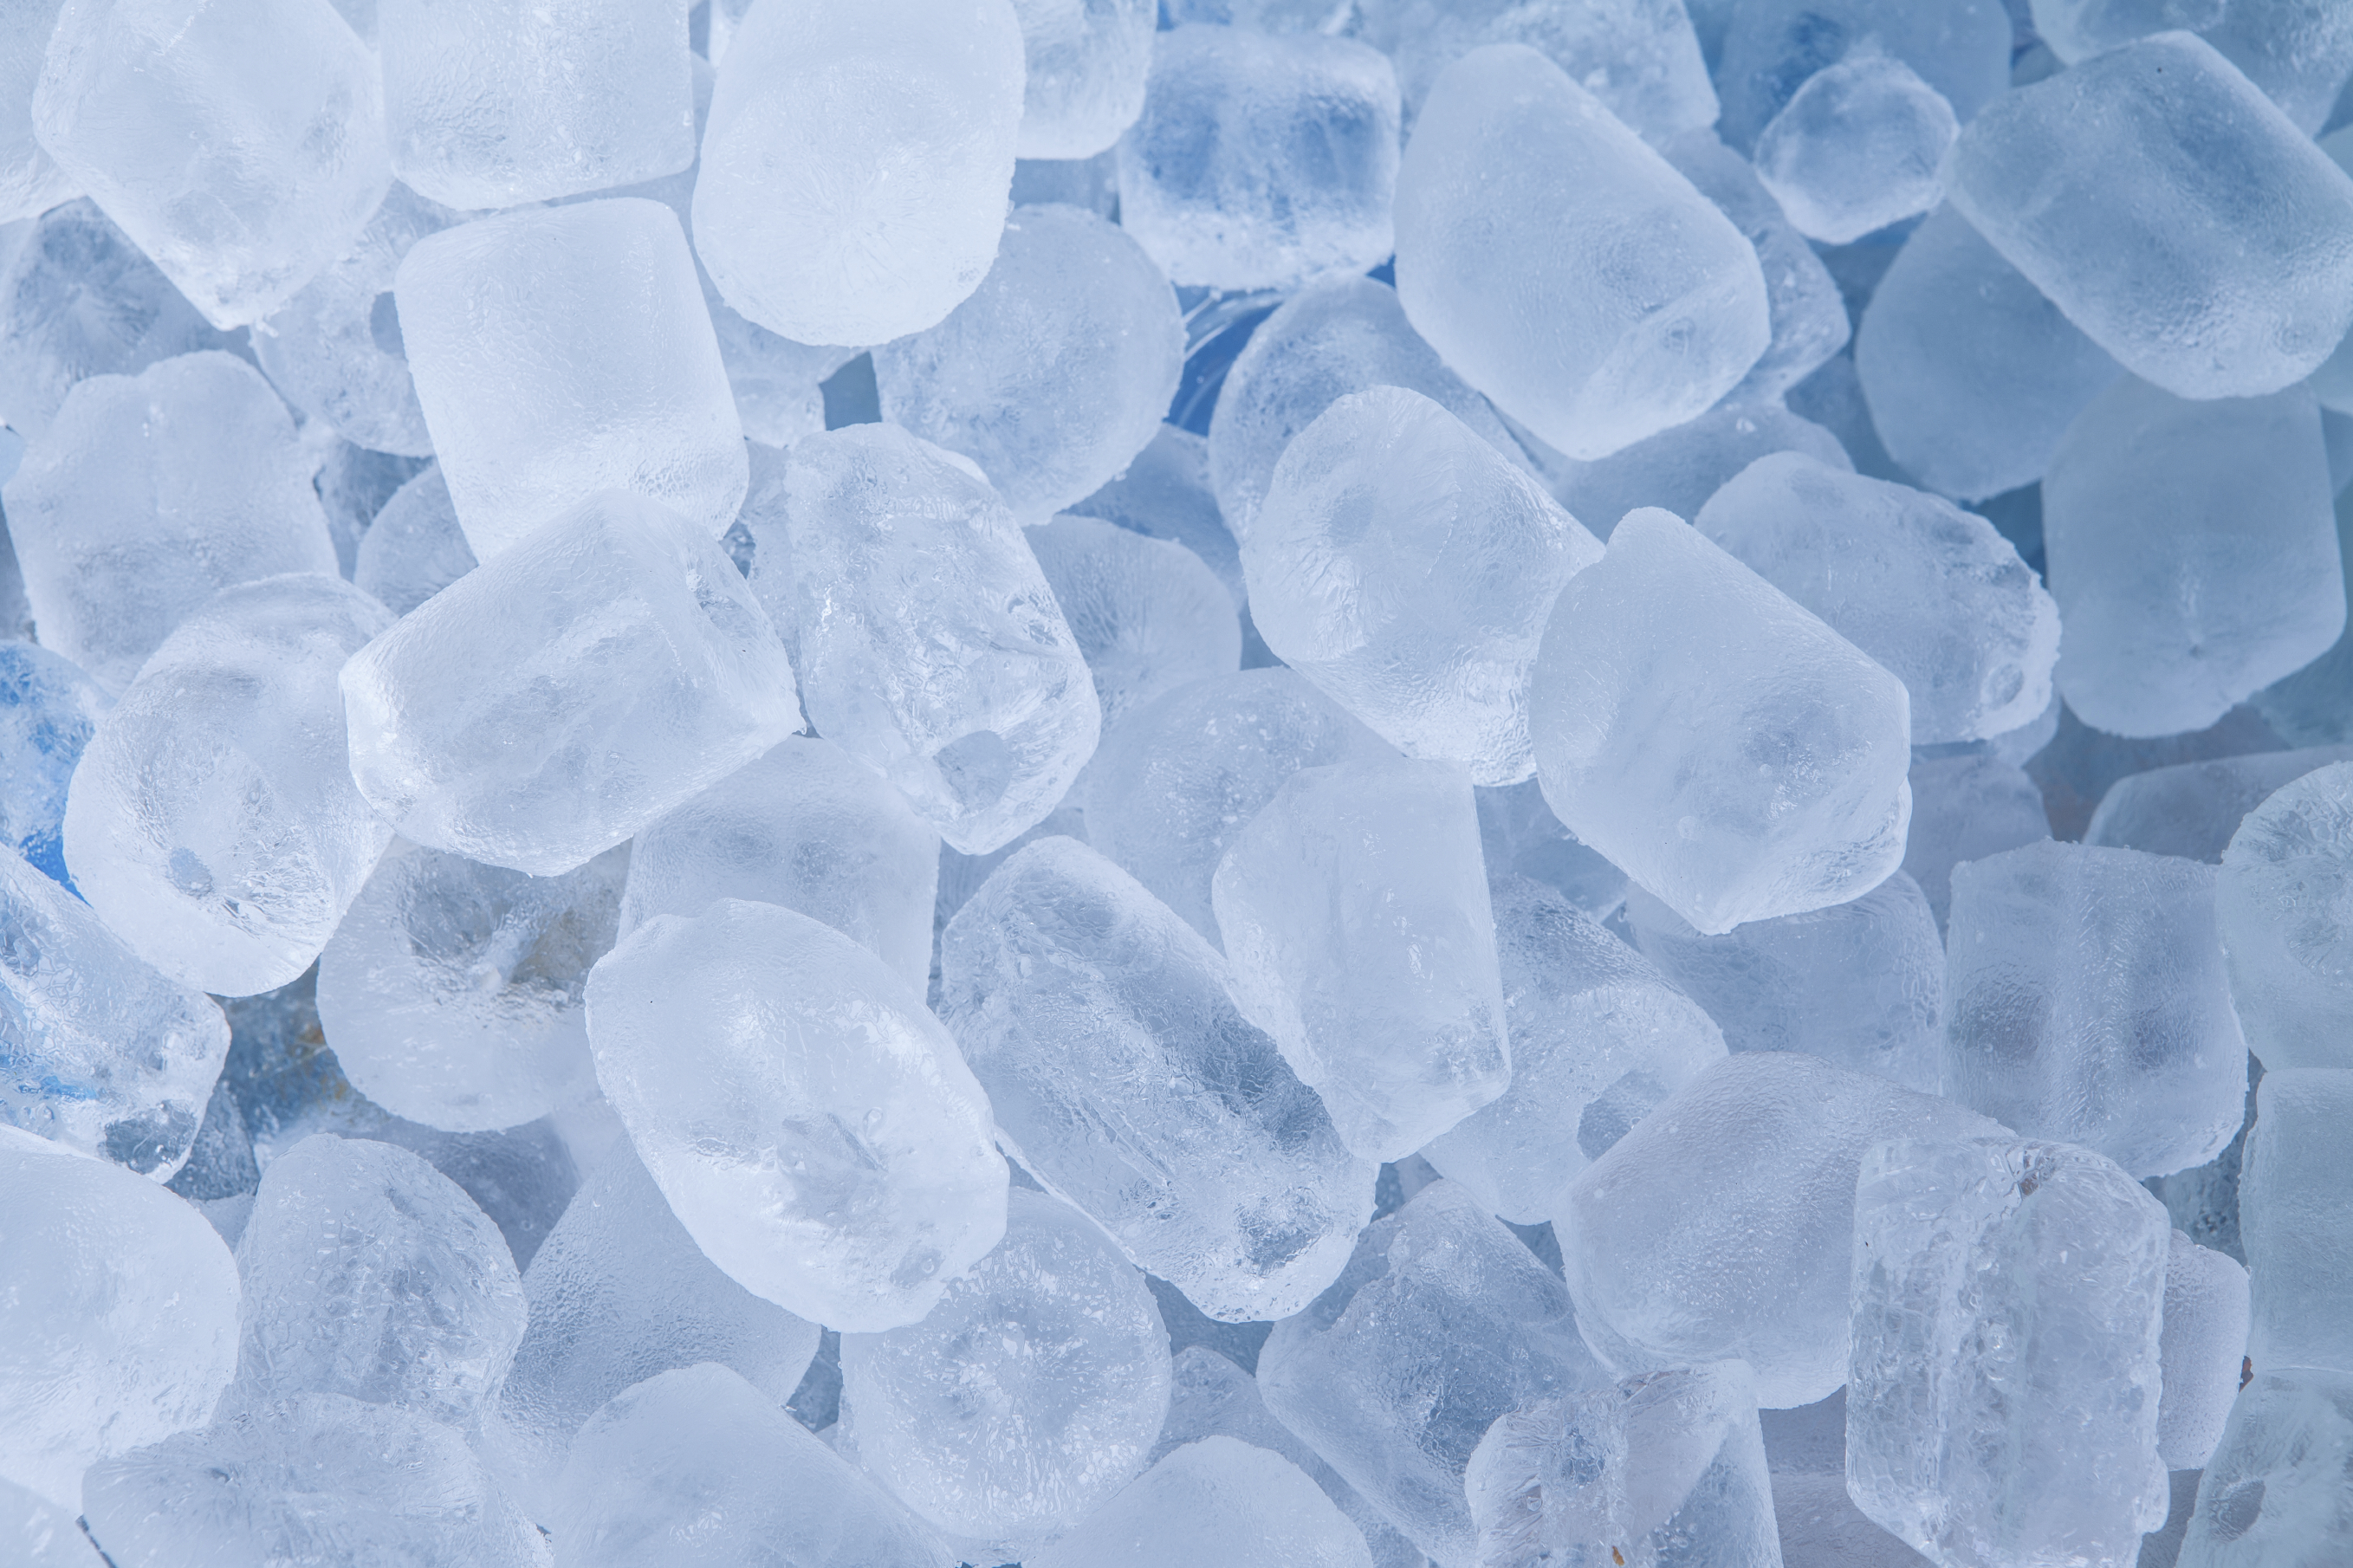 N-ice - pure, crystal clear ice-cubes from Papafilipou, Cyprus